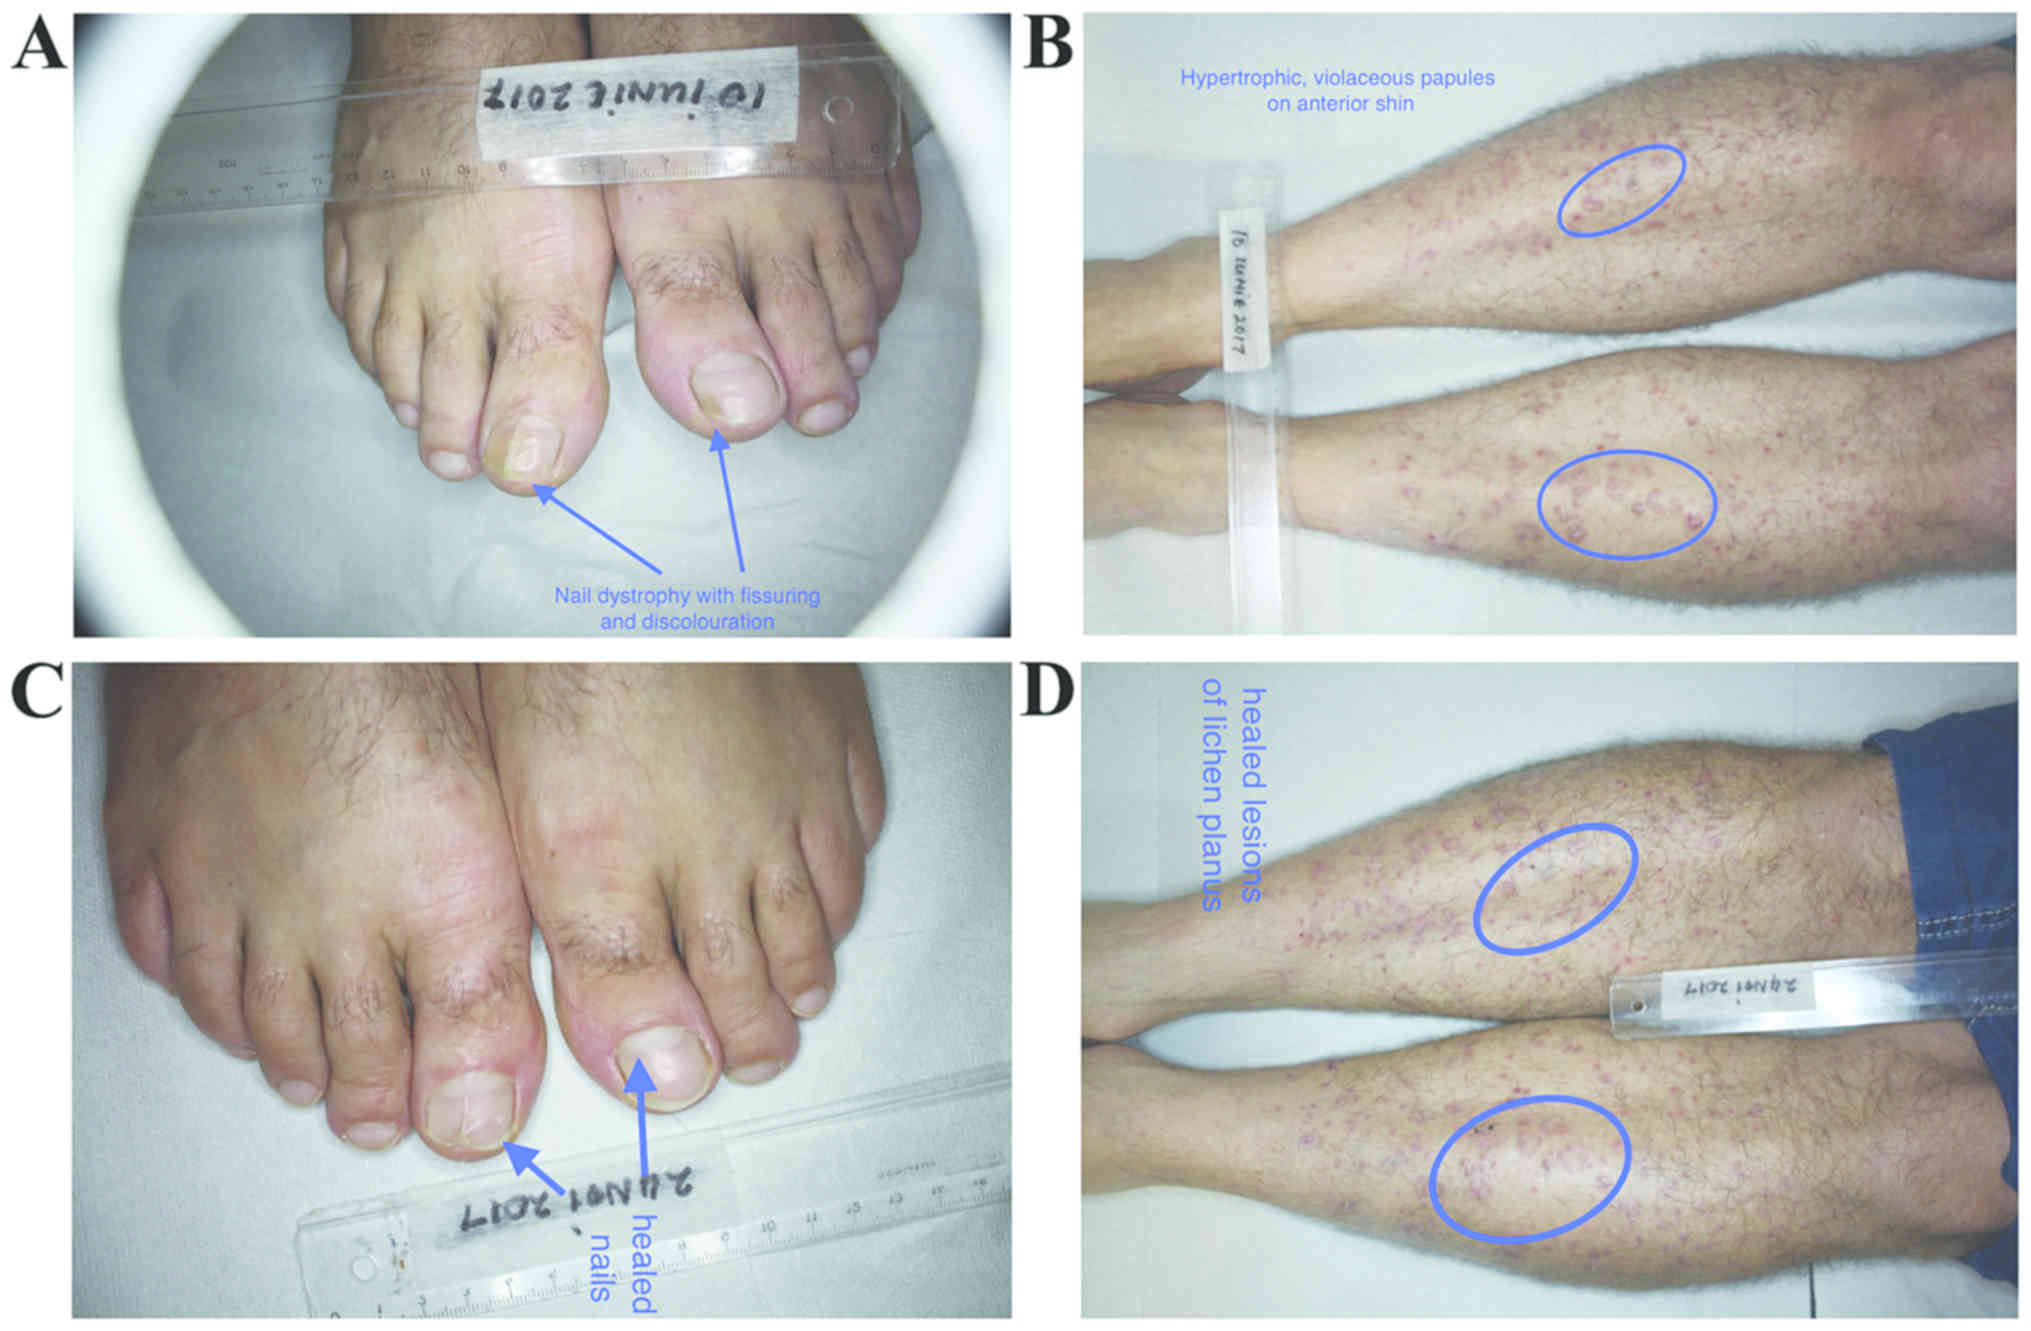 Nail lichen planus: A review of clinical presentation, diagnosis and  therapy - ScienceDirect